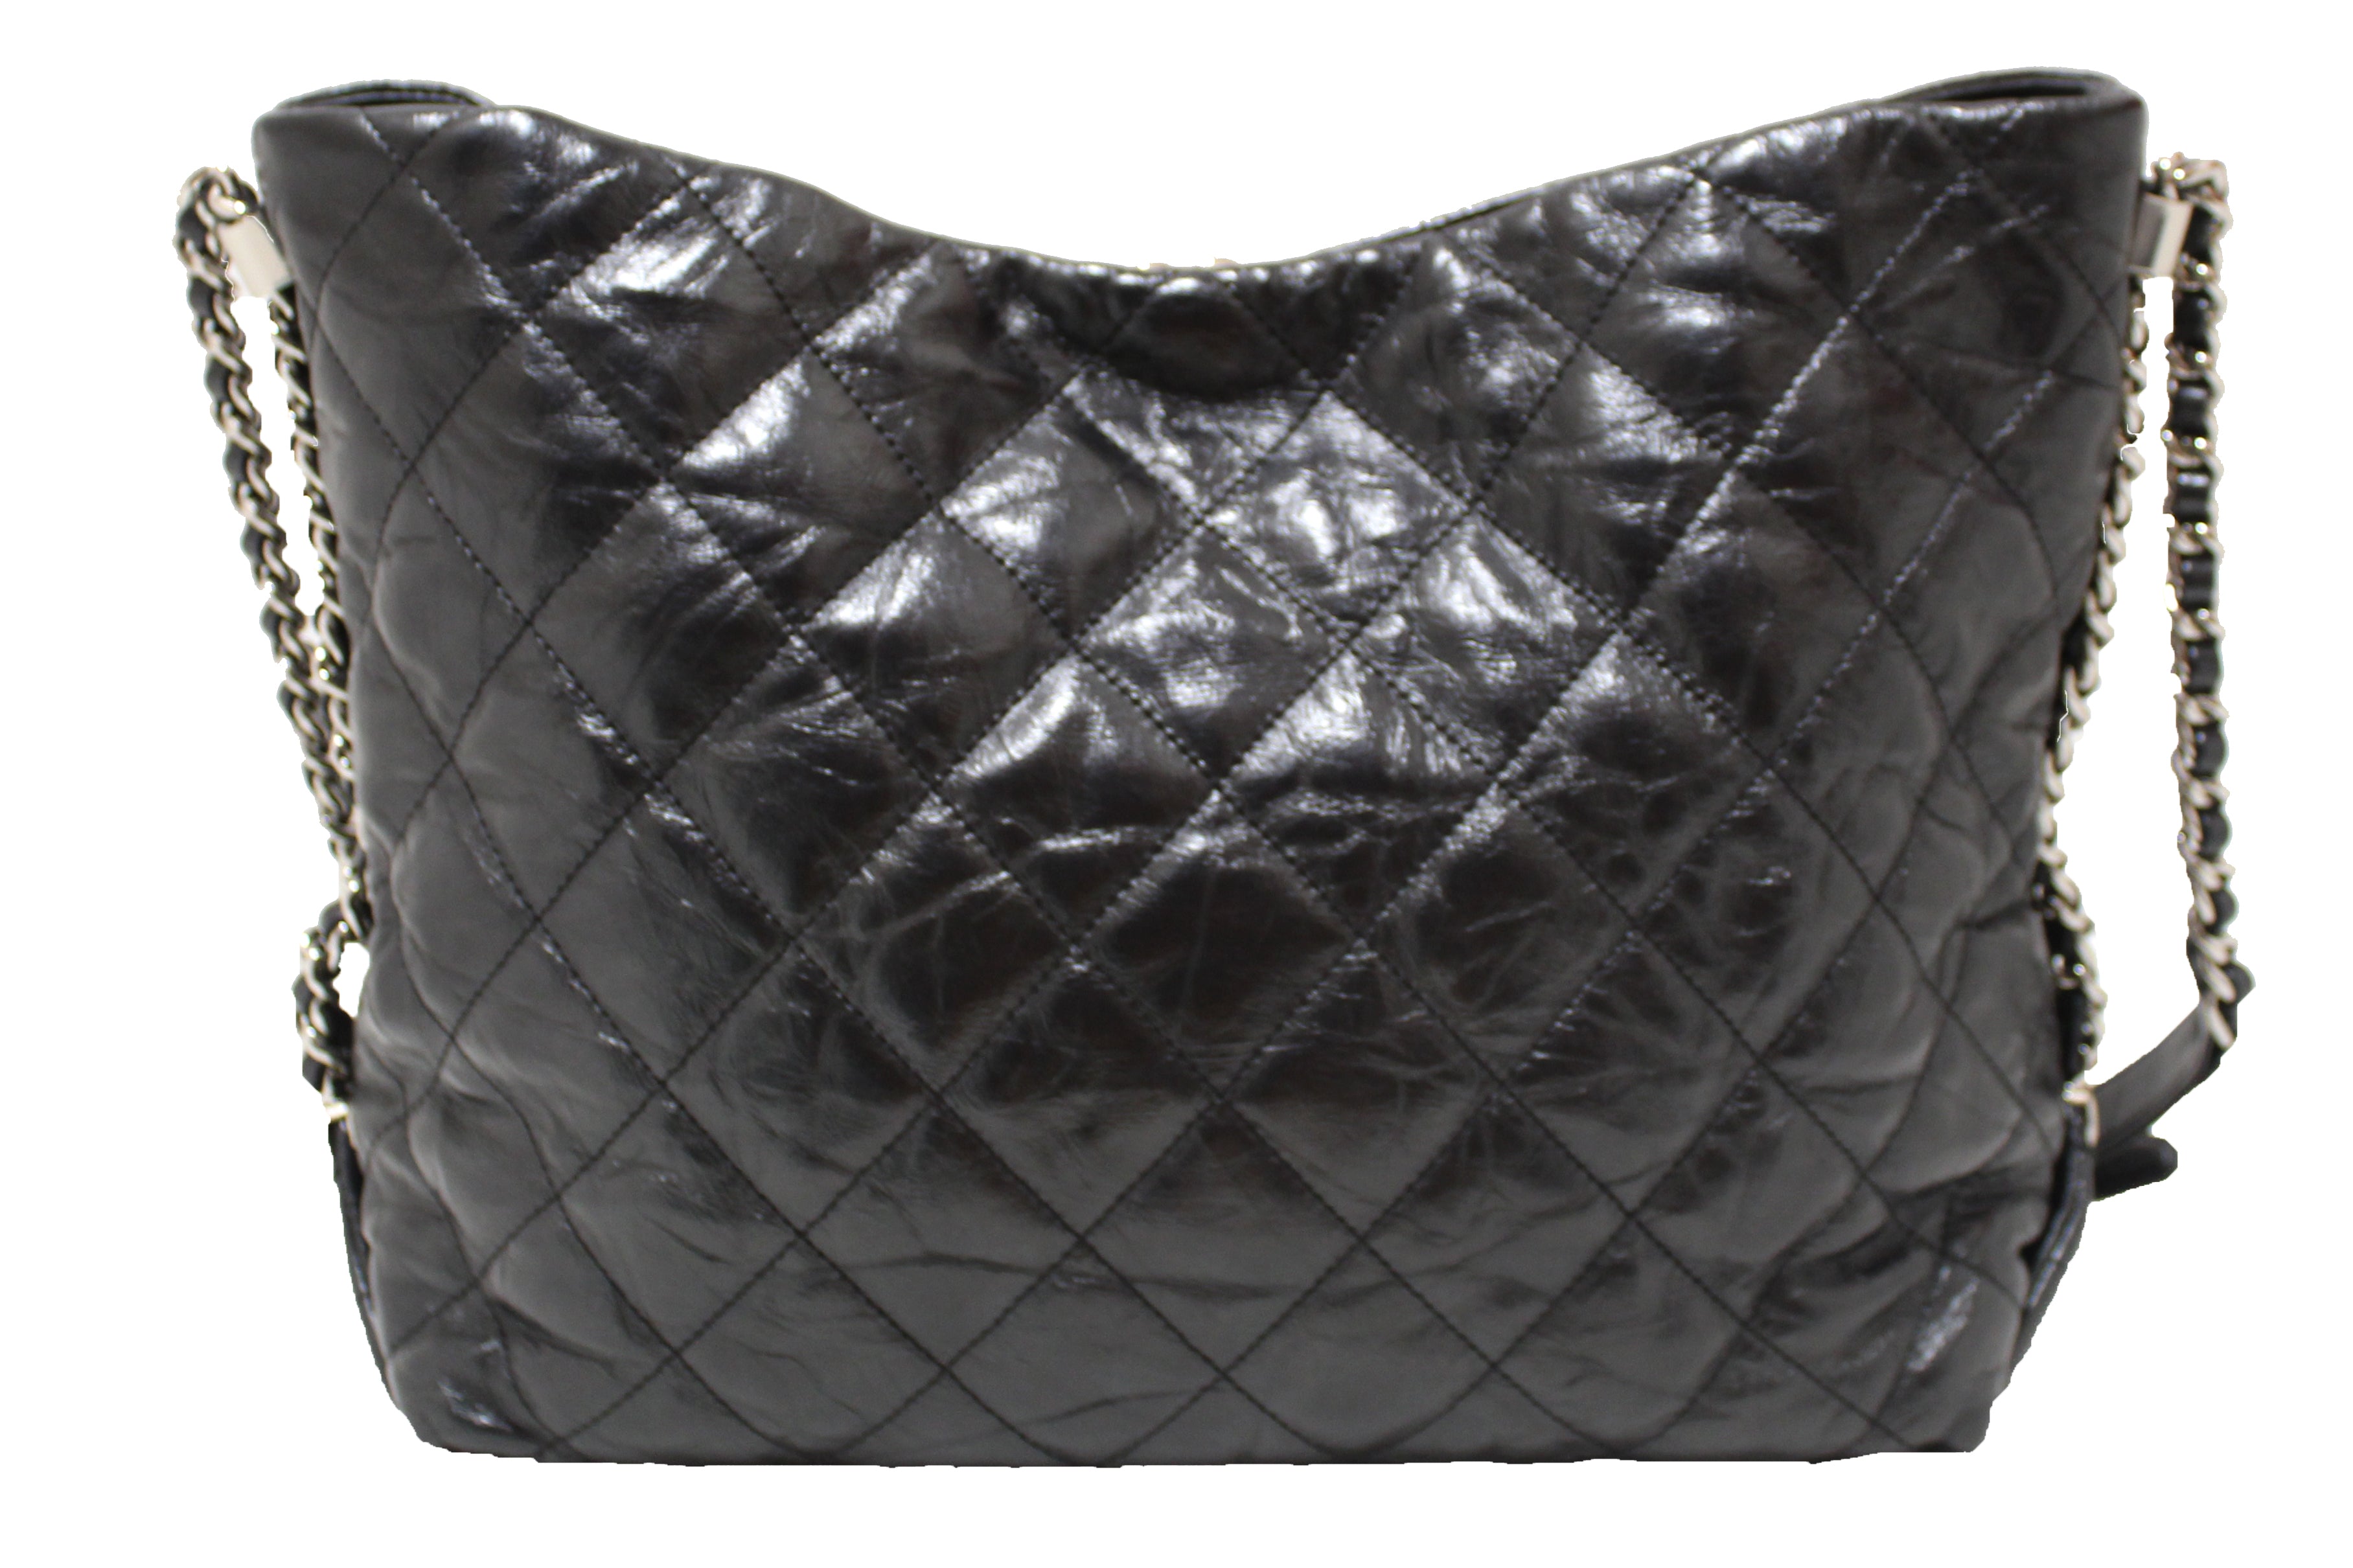 Authentic Chanel Grey Metallic Lambskin Quilted Leather Hobo Shoulder Bag